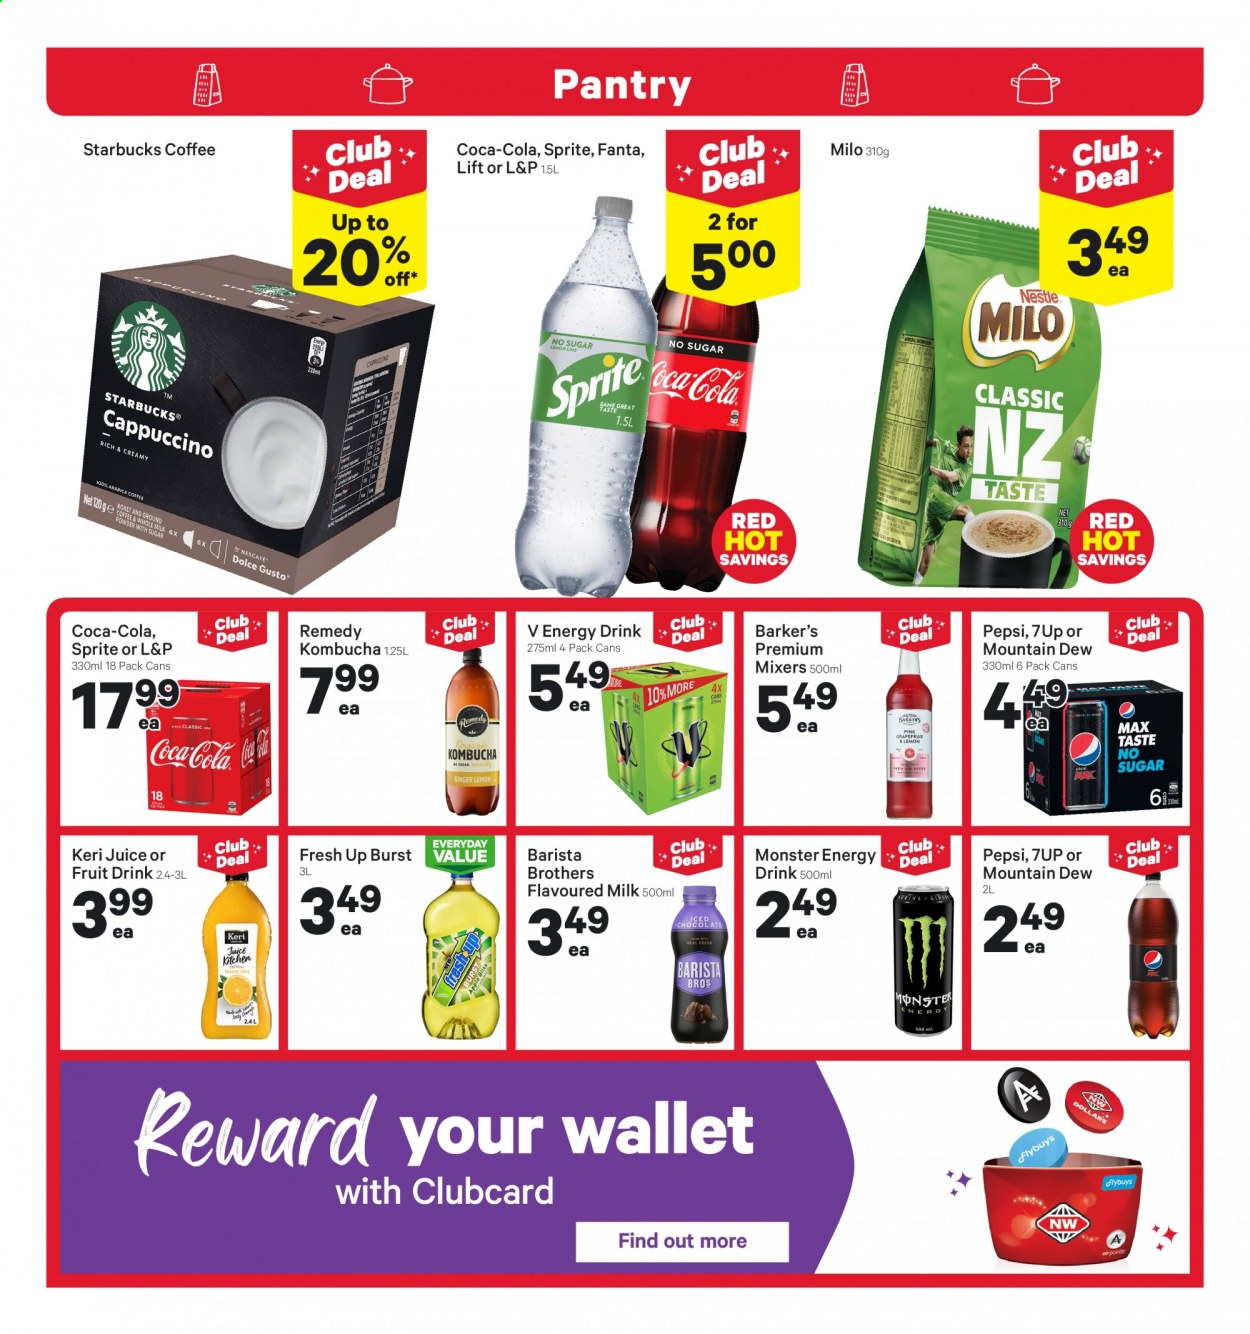 thumbnail - New World mailer - 28.06.2021 - 04.07.2021 - Sales products - ginger, grapefruits, milk, flavoured milk, Milo, Nestlé, chocolate, Coca-Cola, Mountain Dew, Sprite, Pepsi, juice, energy drink, Monster, Fanta, fruit drink, 7UP, L&P, Monster Energy, kombucha, cappuccino, coffee, Nescafé, Dolce Gusto, Starbucks, BROTHERS, Keri. Page 11.